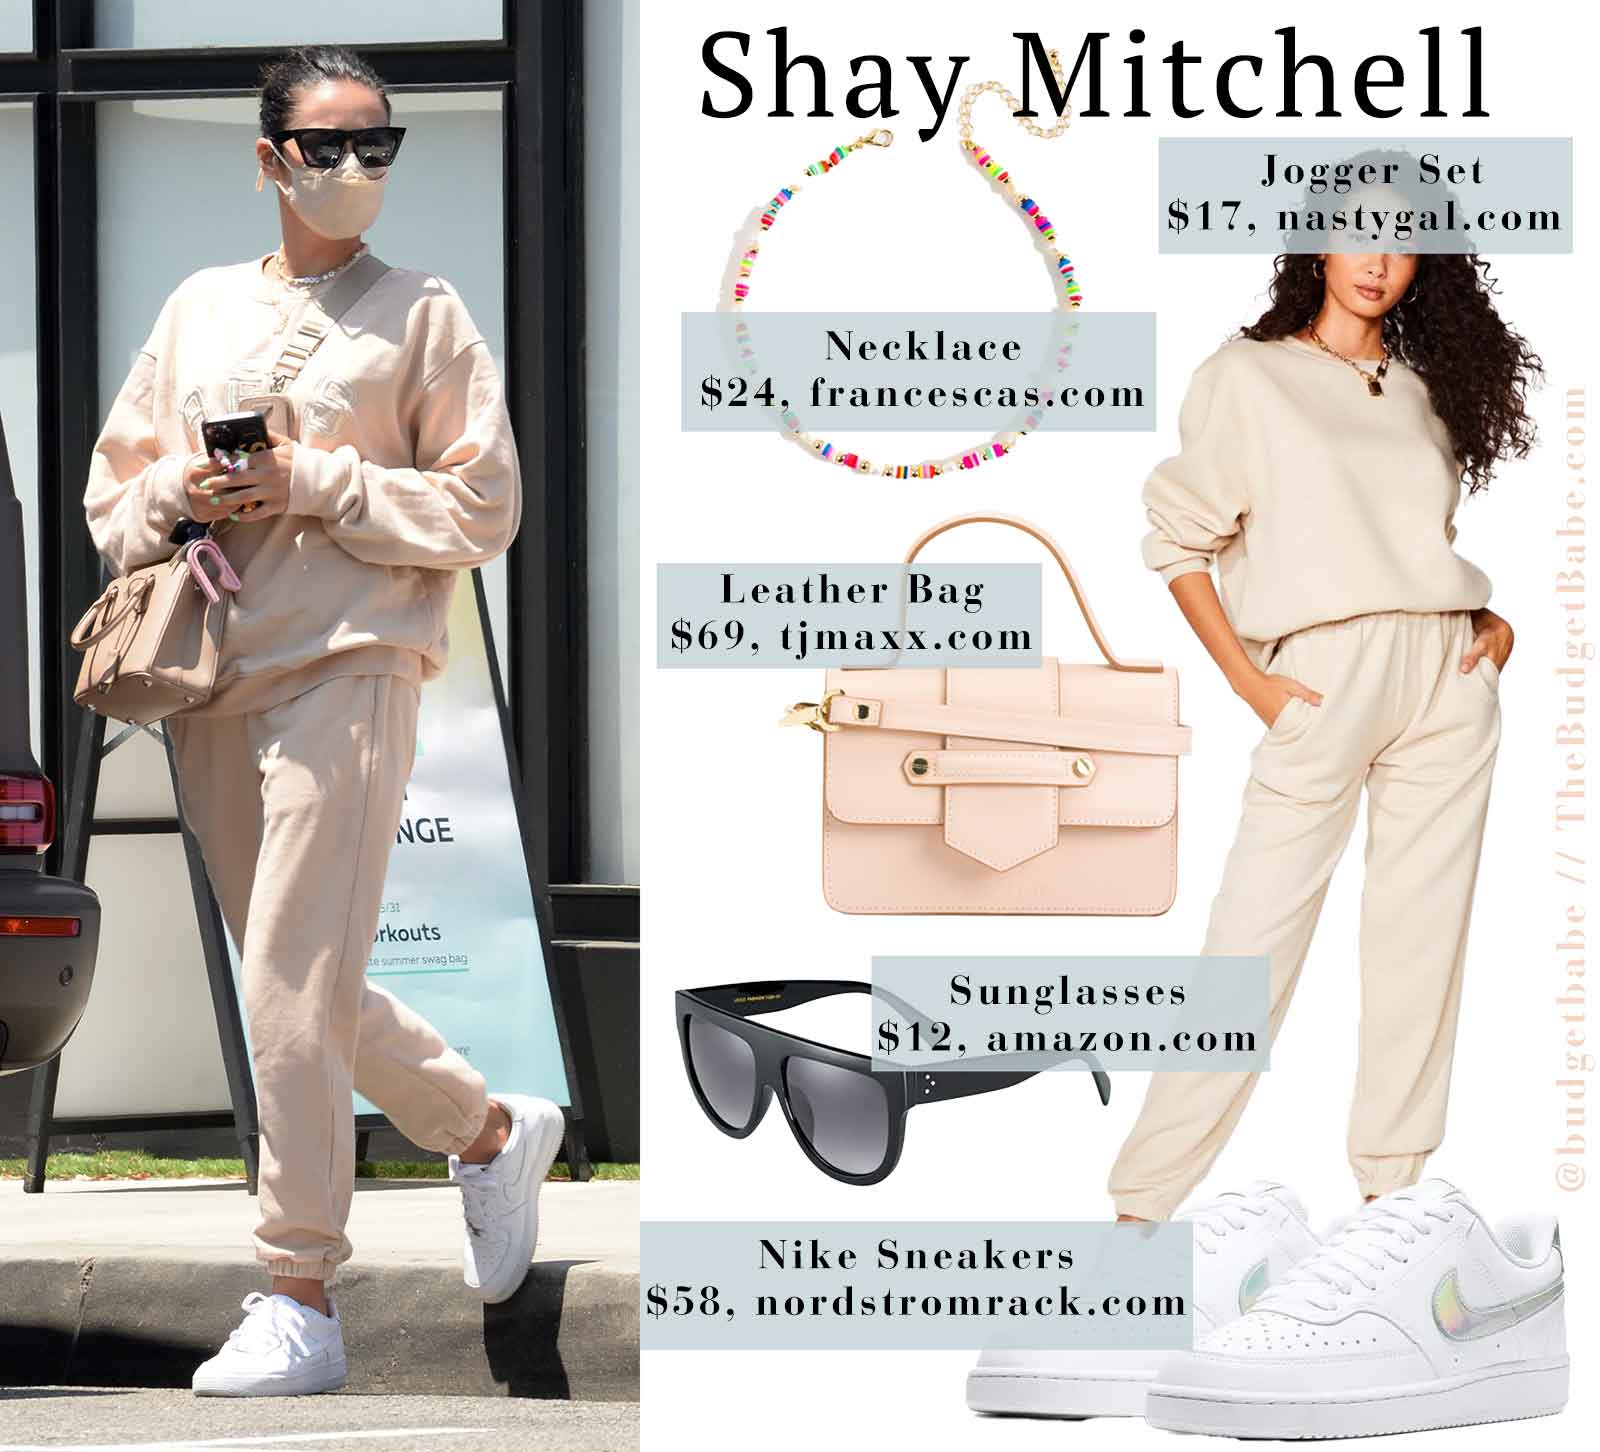 Shay Mitchell's jogger set and Nikes look for less